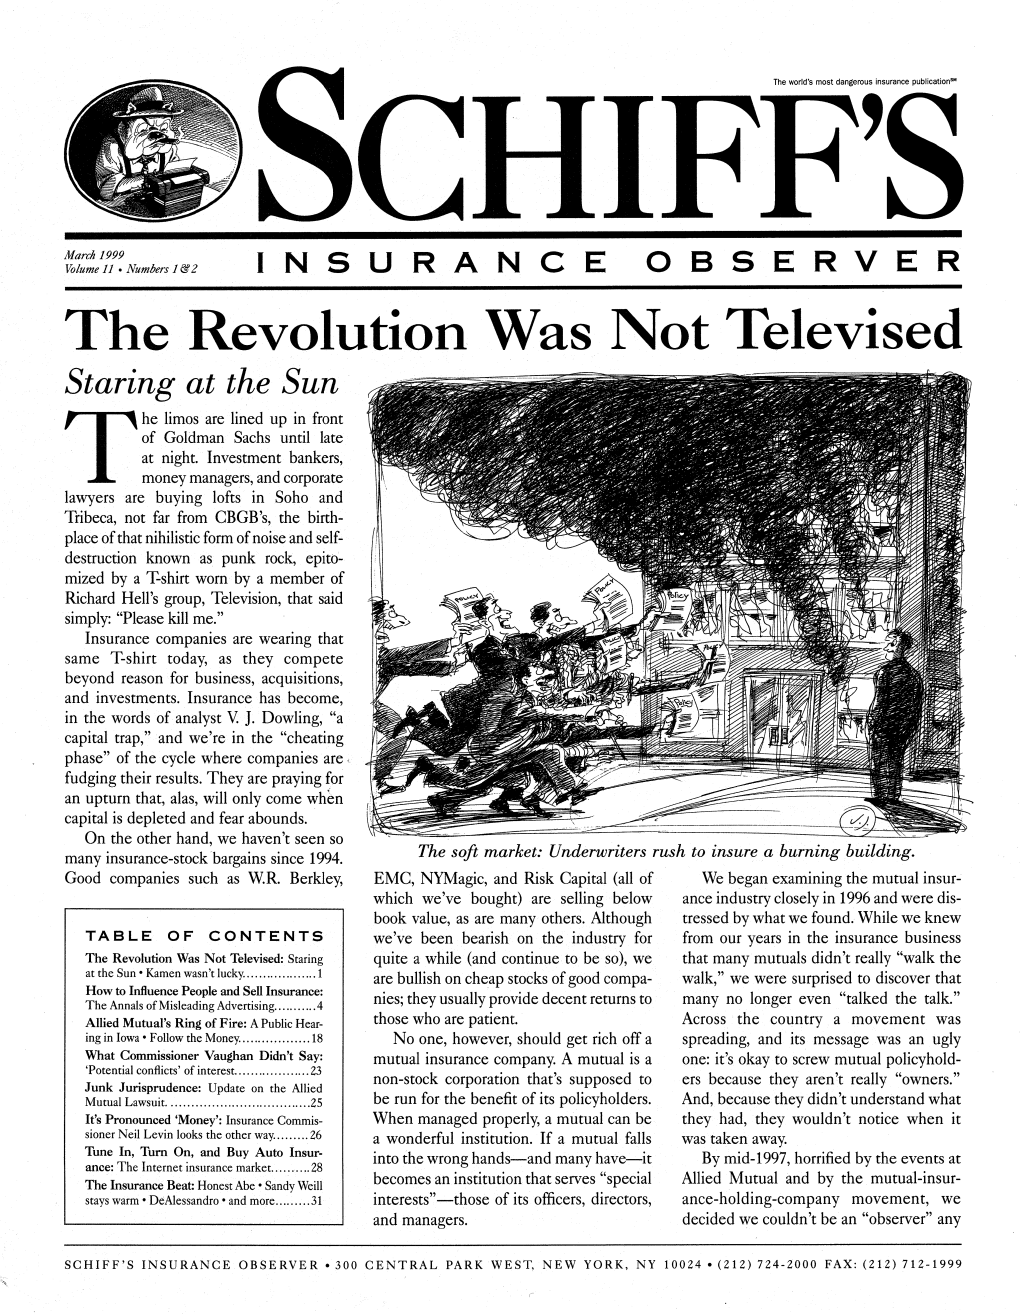 March 1, 1999 Vol. 11, No. 1&2 the Revolution Was Not Televised